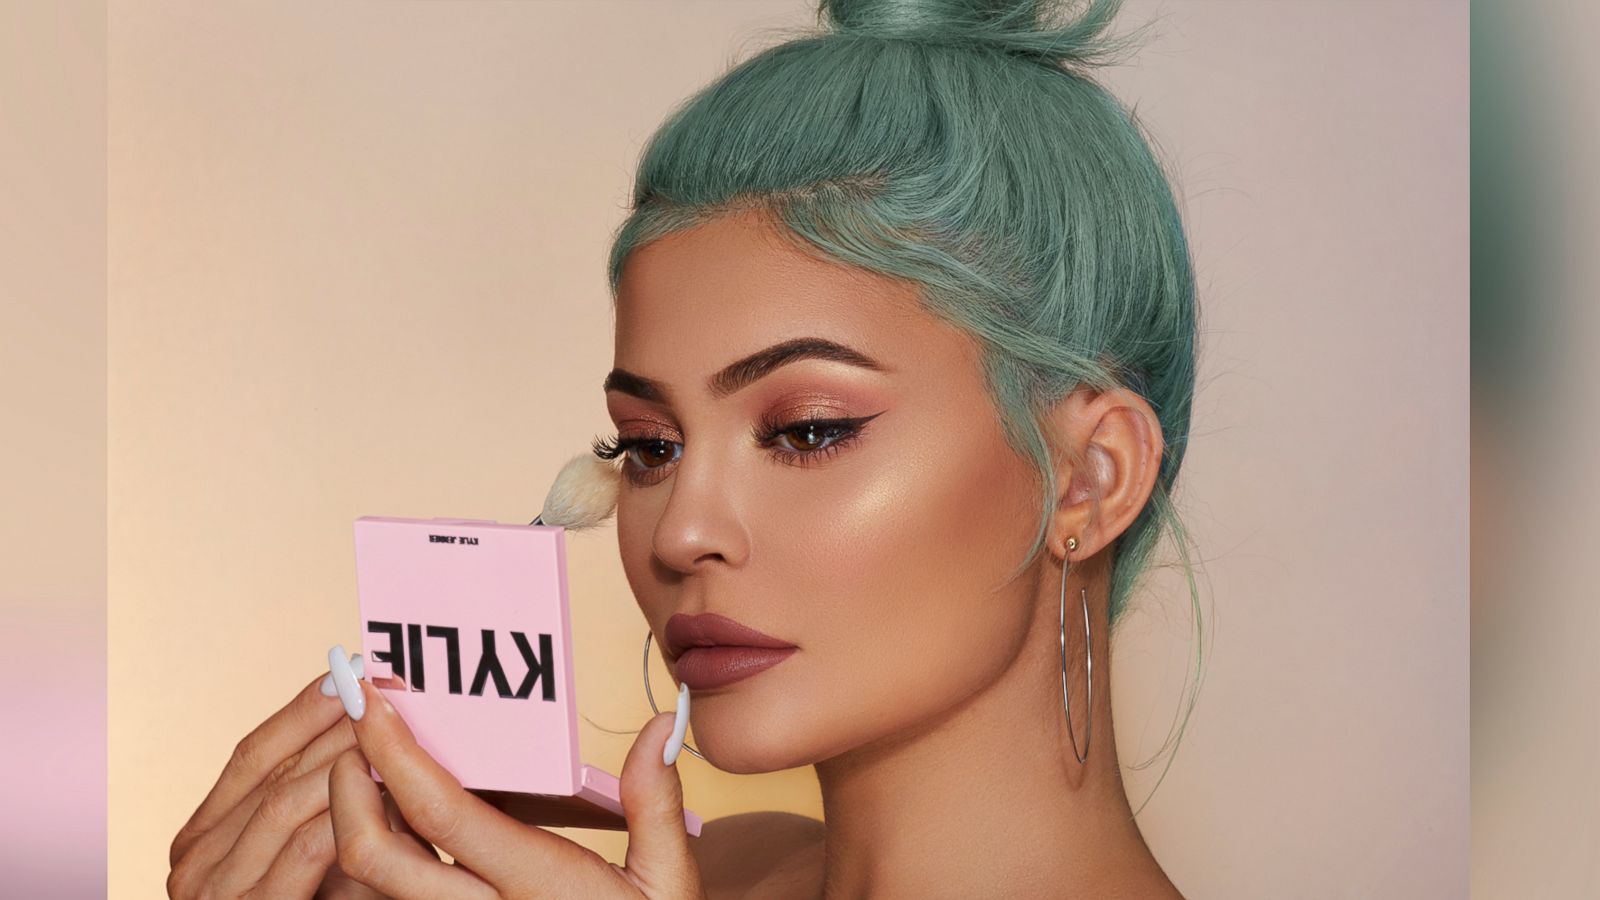 Kylie Cosmetics just launched a truckload of new product launches